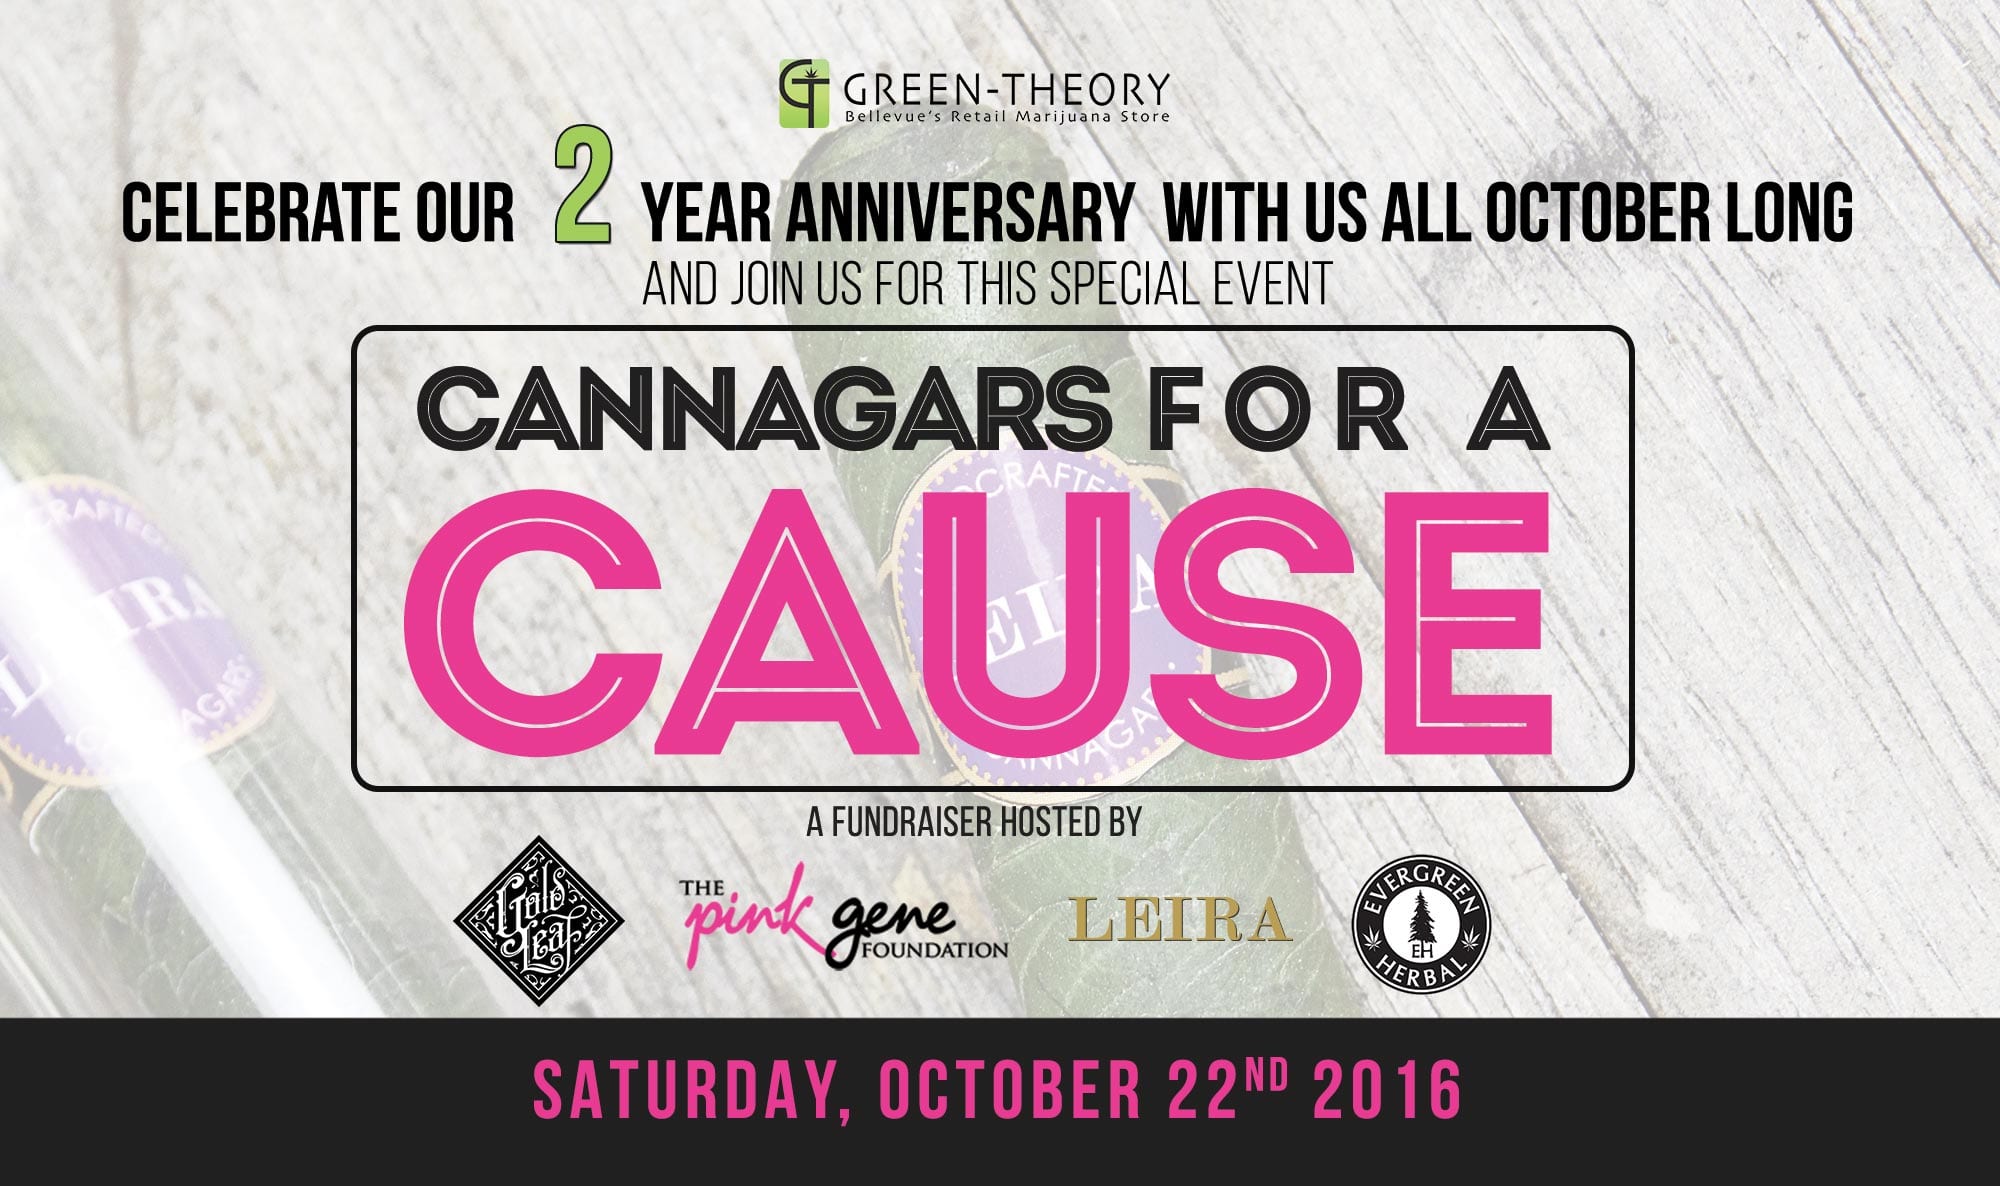 Cannagar Fundraiser from Green-Theory helping raise for a great cause